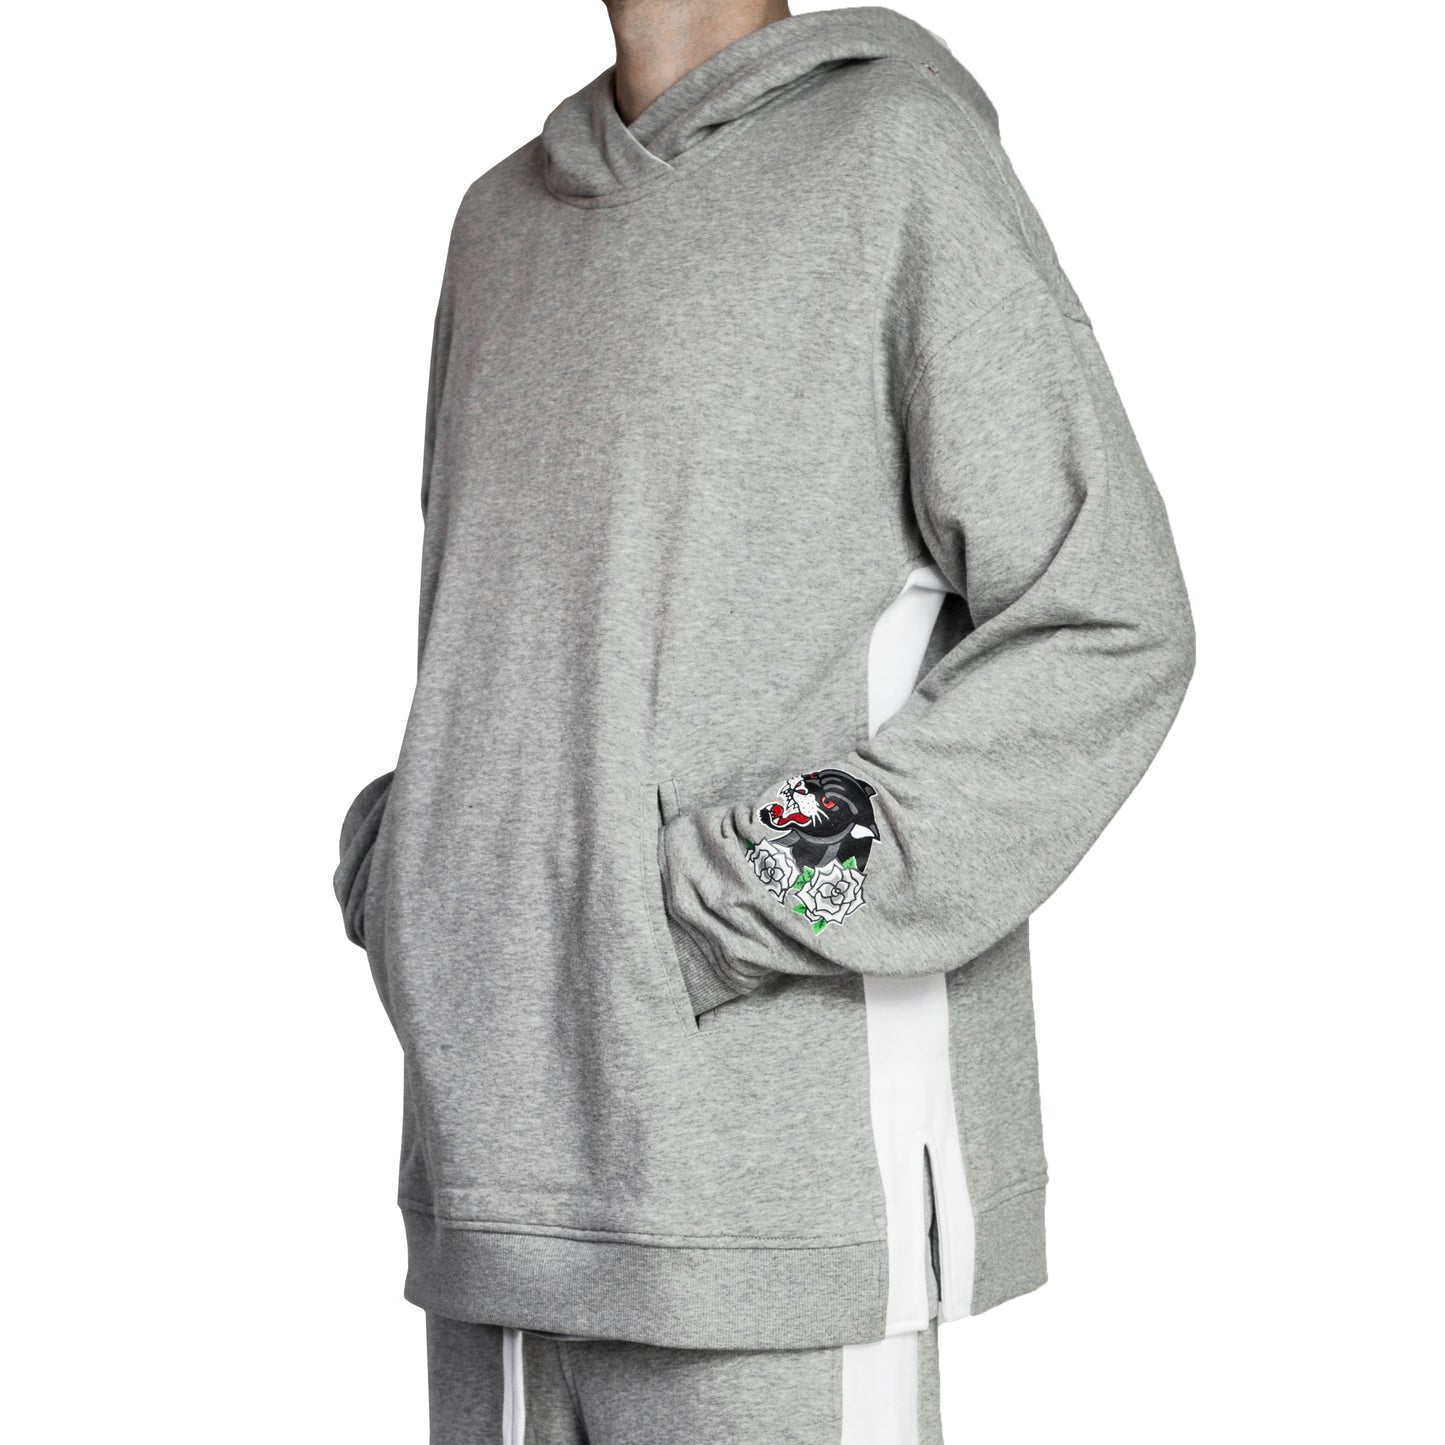 Panther Hoody : Heather Grey/White